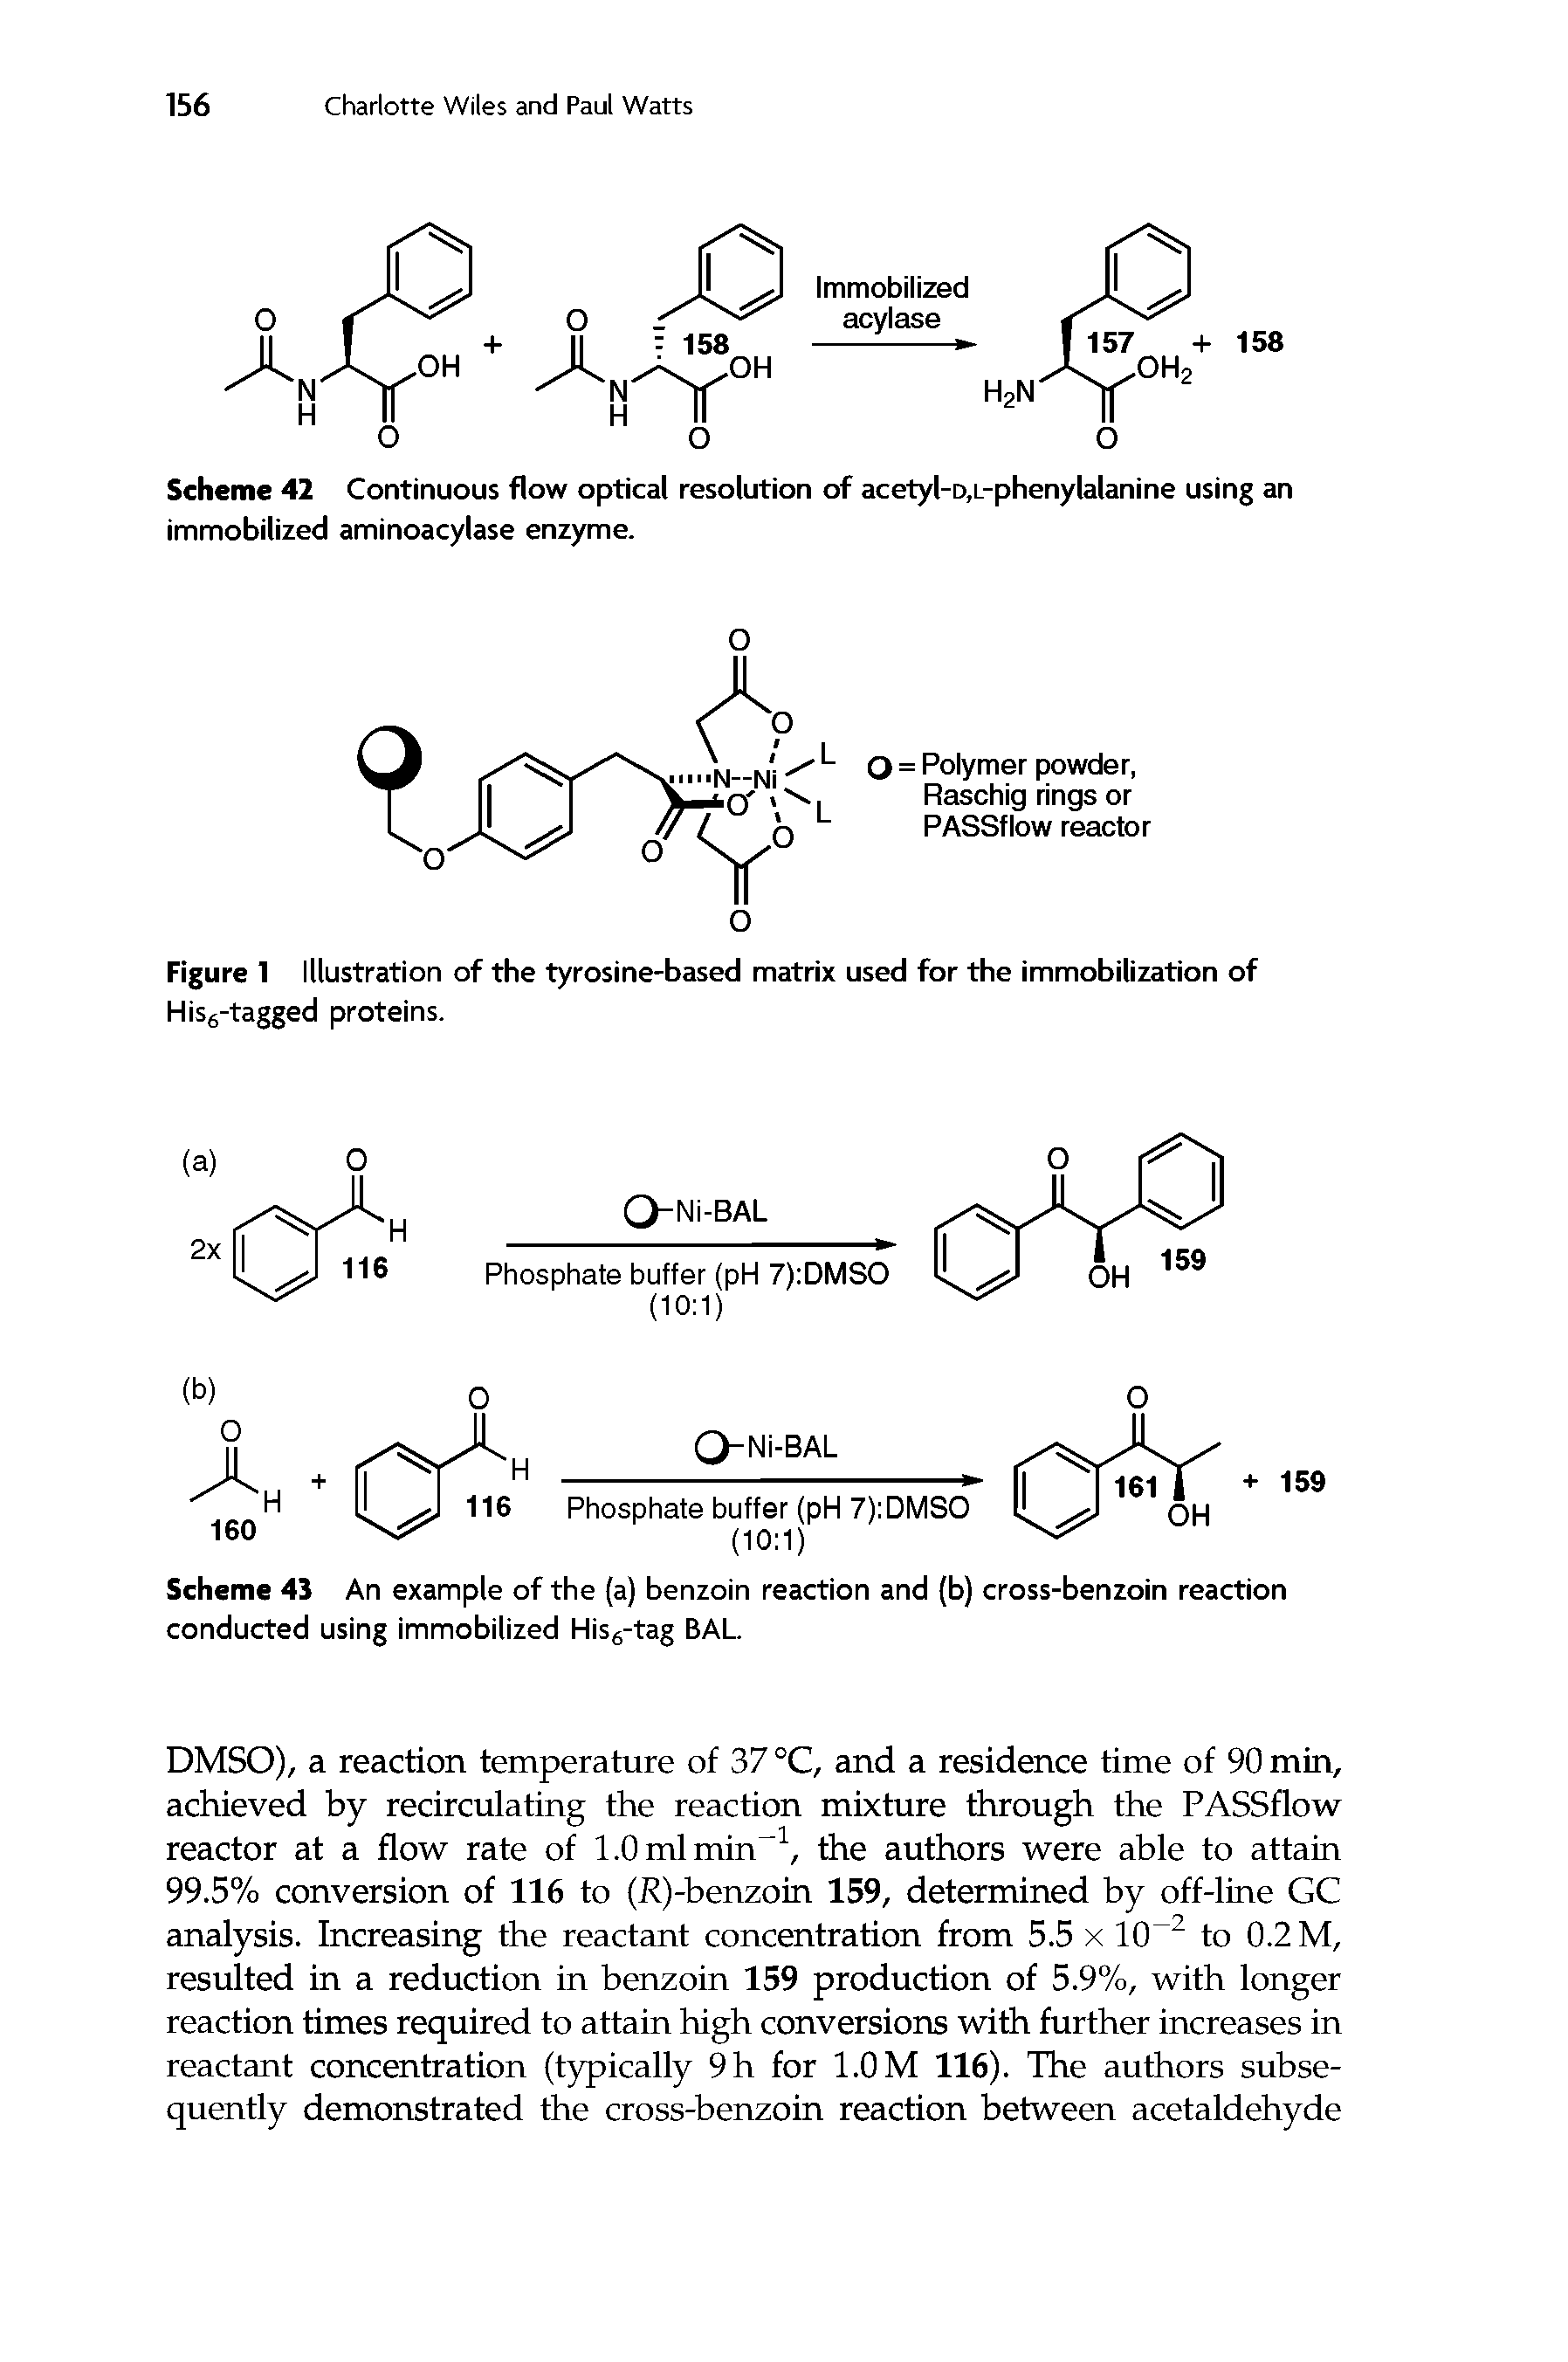 Scheme 42 Continuous flow optical resolution of acetyl-D,L-phenylalanine using an immobilized aminoacylase enzyme.